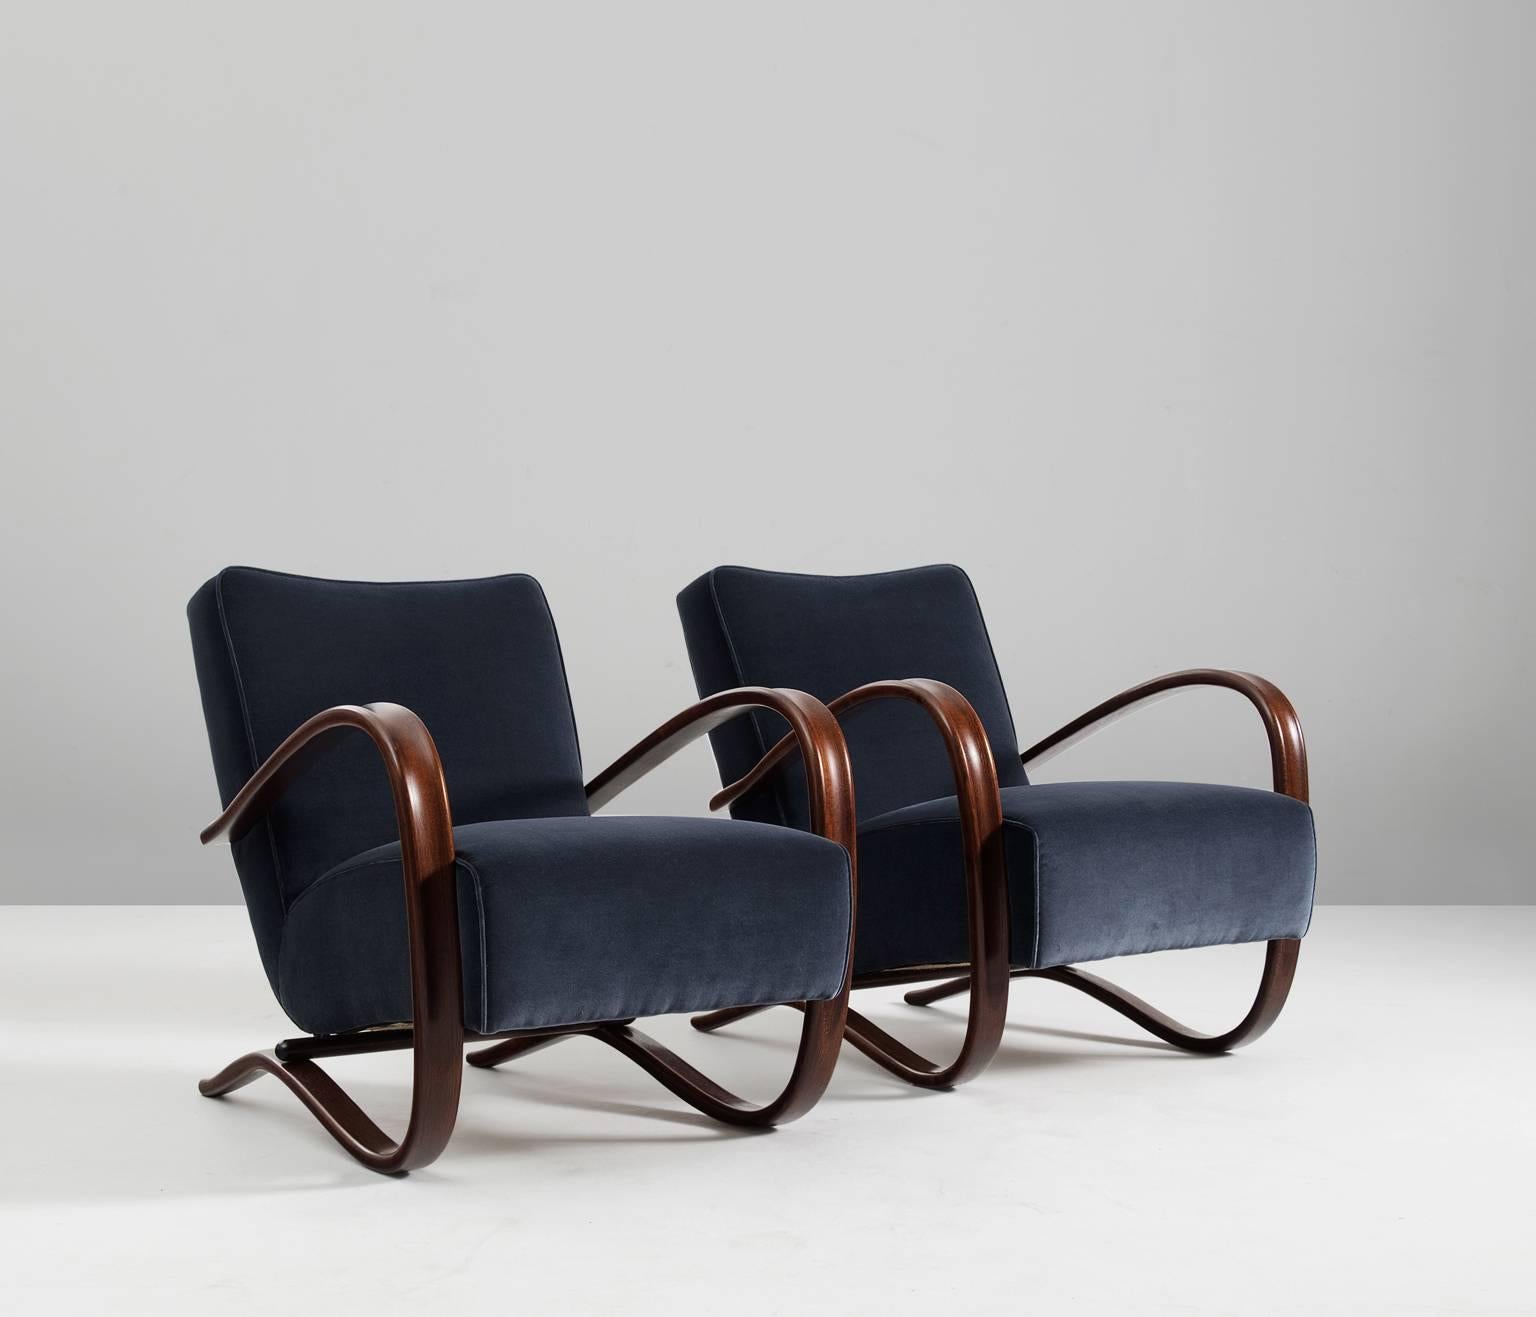 Jindrich Halabala, pair of armchairs, beech and fabric, Czech Republic, 1930s. 

These chairs have a very dynamic appearance, due the curved base that ends fluently in the armrests. The dark brown stained wood nicely combines to the dark blue velvet